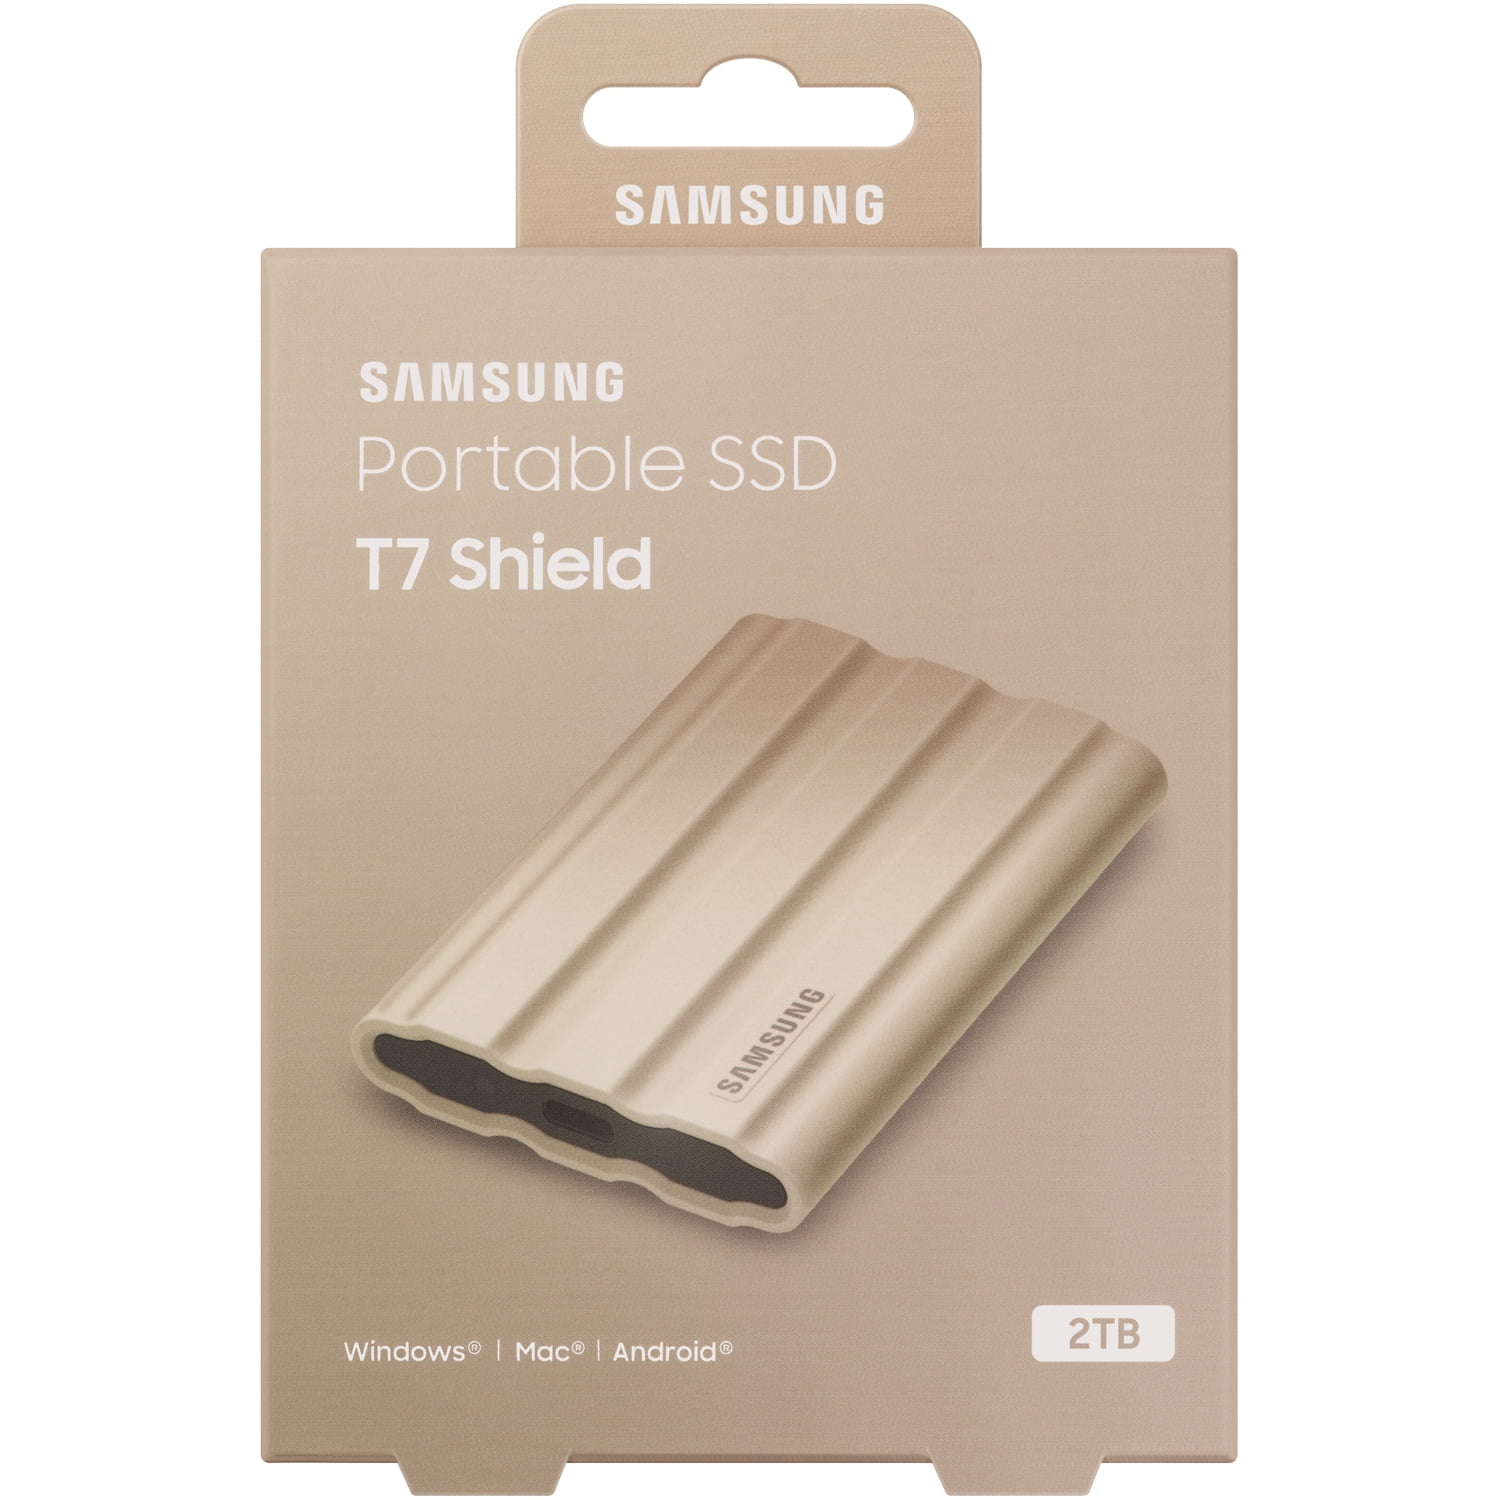 Samsung's Rugged and Portable T7 Shield SSD Is Now Just $60 - CNET